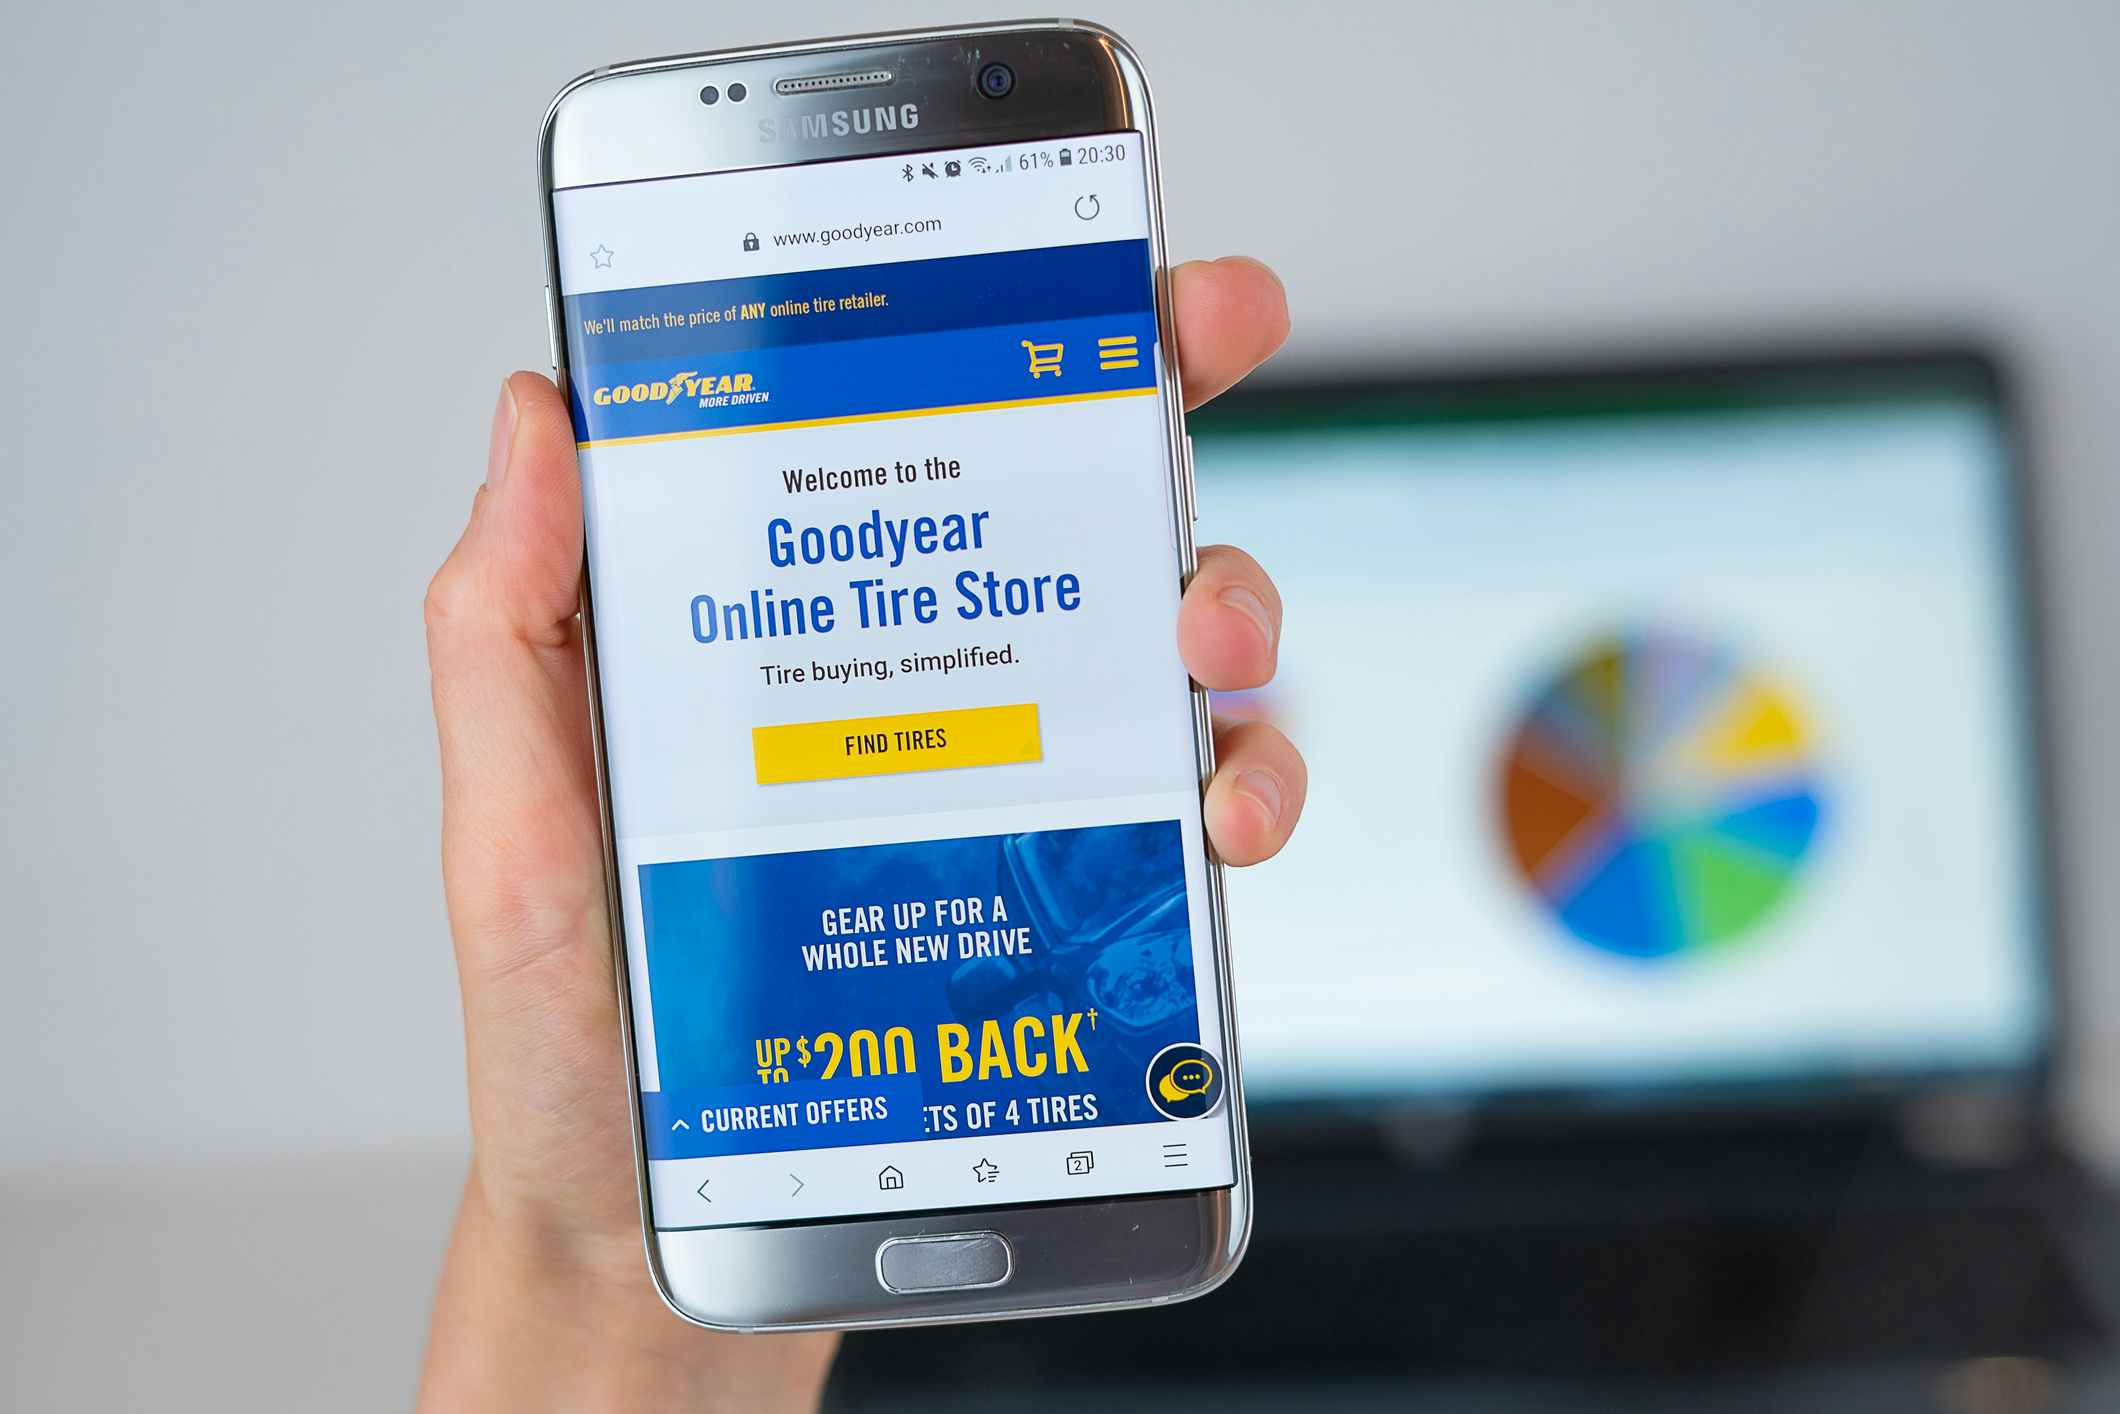 Goodyear web site on mobile phone screen. Mobile version of Goodyear company web page on smartphone.